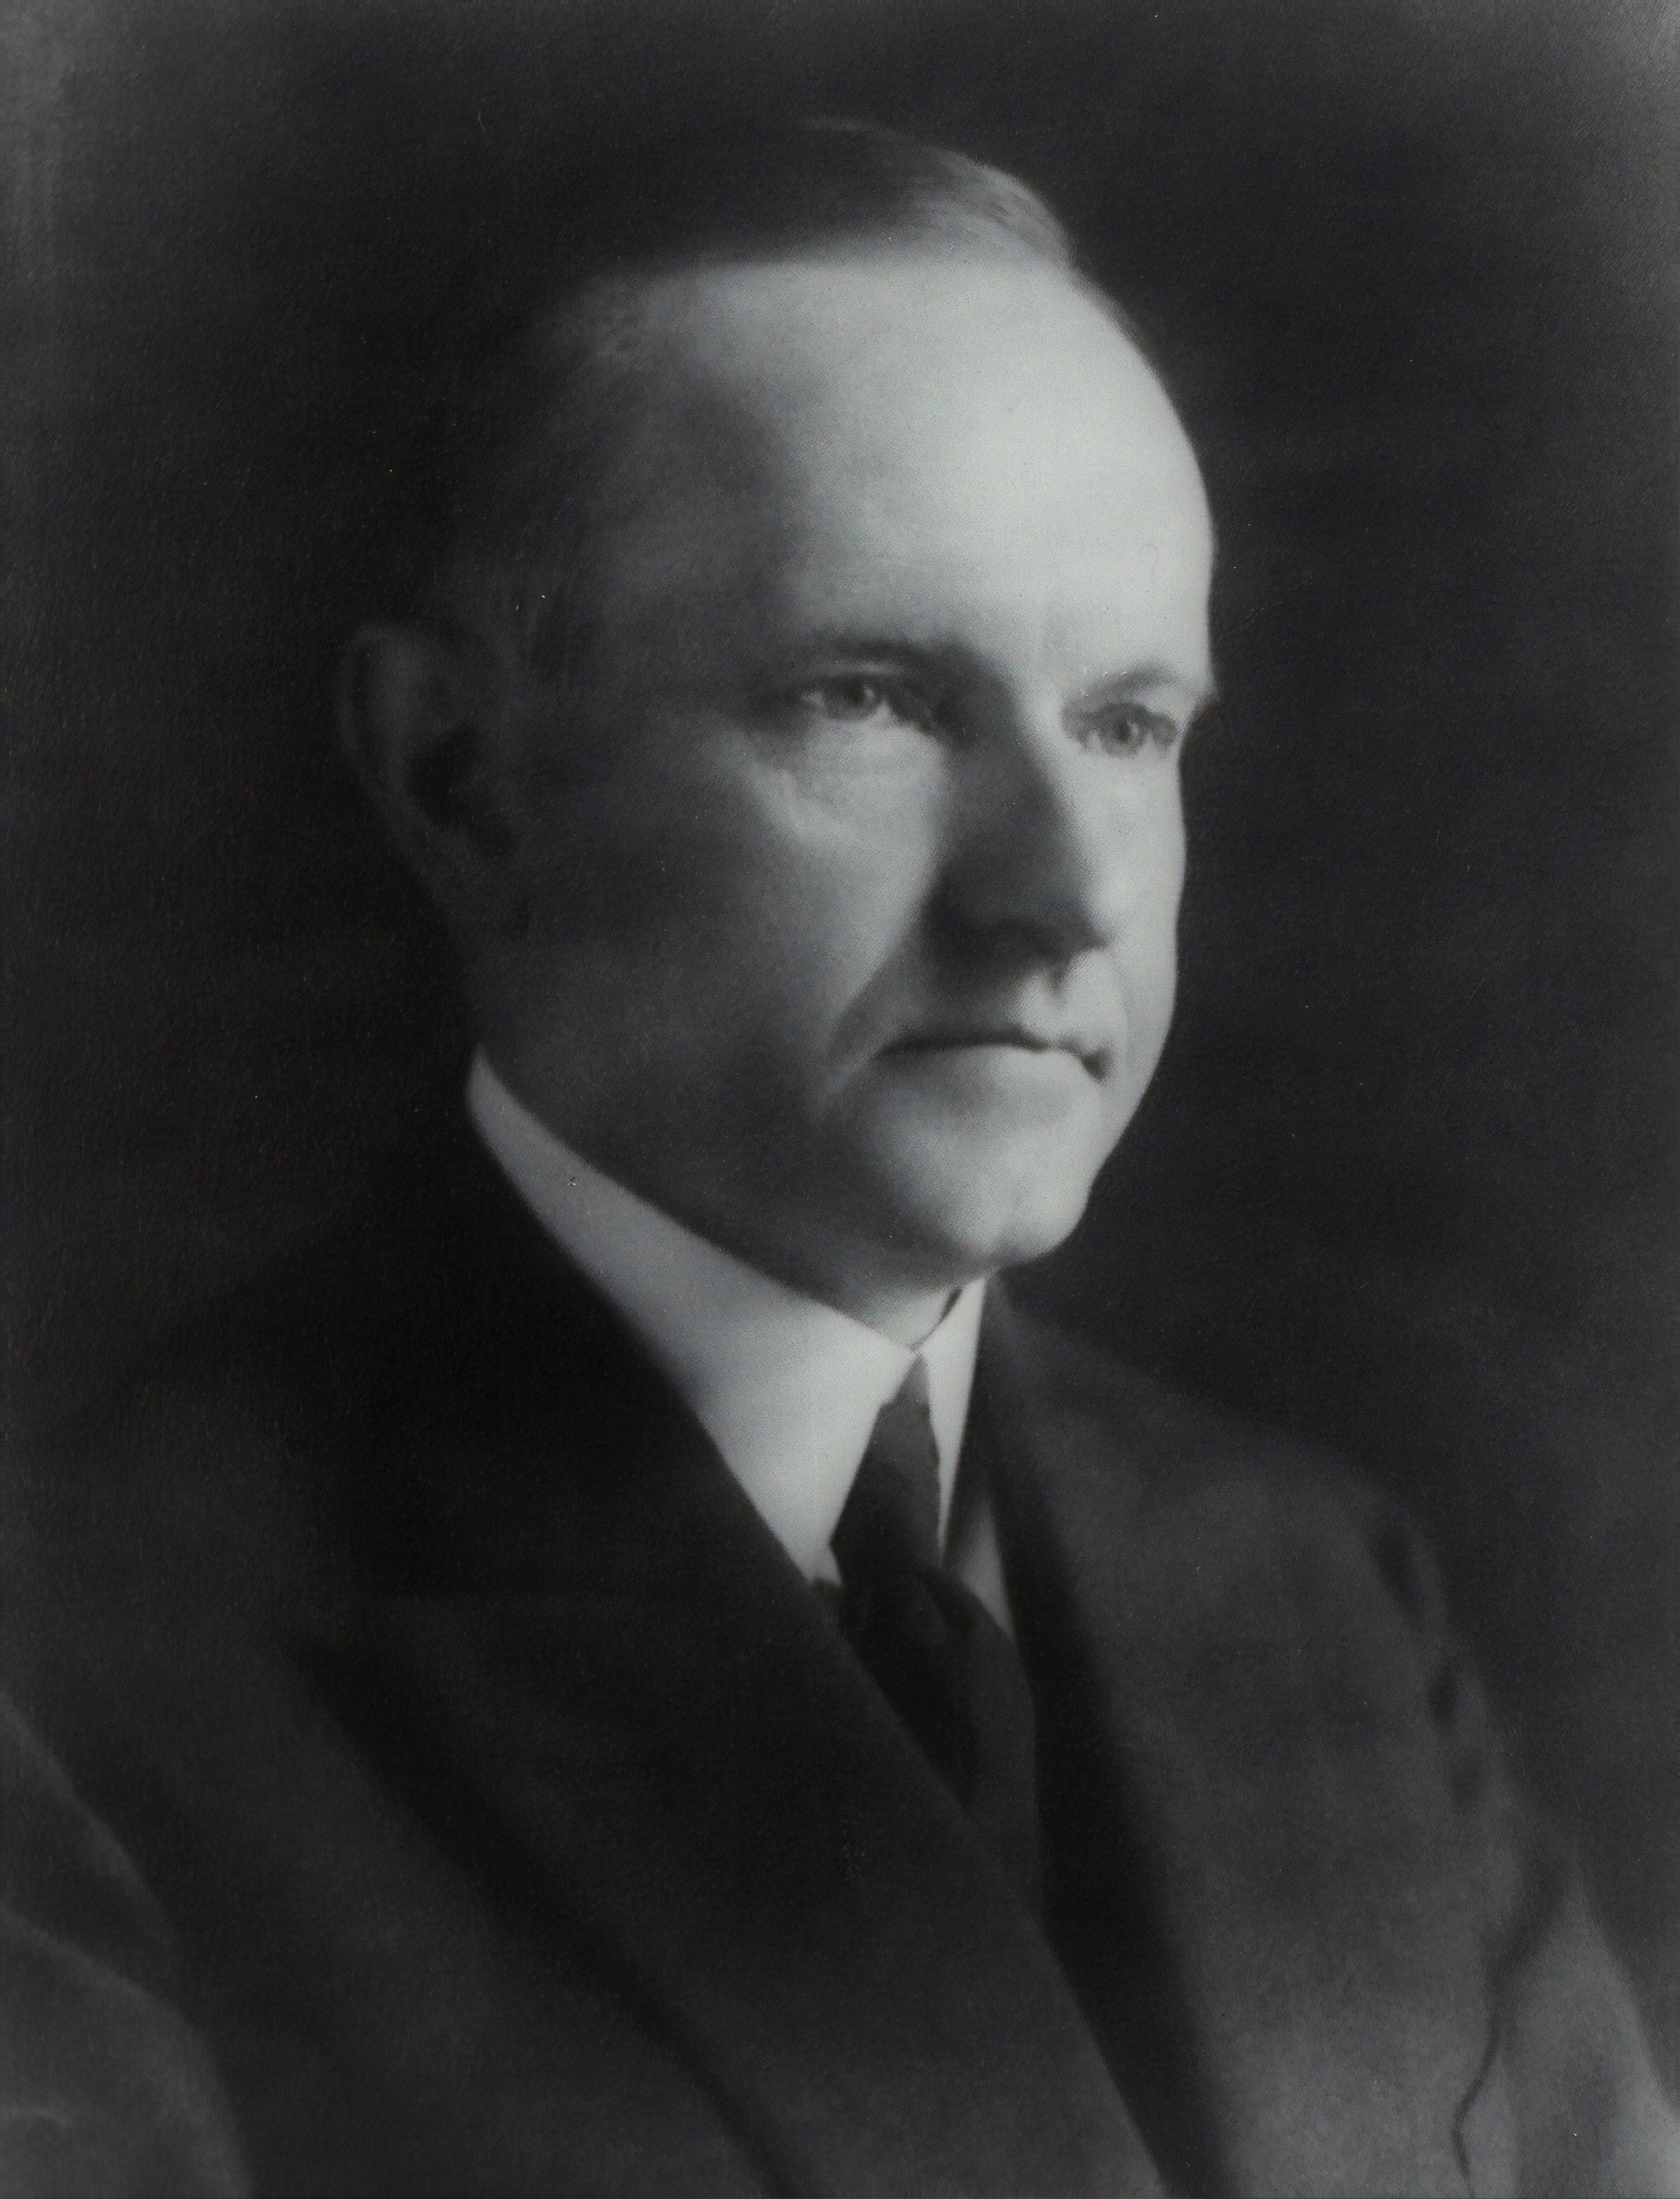 [Calvin Coolidge, head-and-shoulders portrait, facing right]. Photograph from the Presidential File Collection, c1923. Library of Congress Prints & Photographs Division. https://www.loc.gov/resource/cph.3a53302/